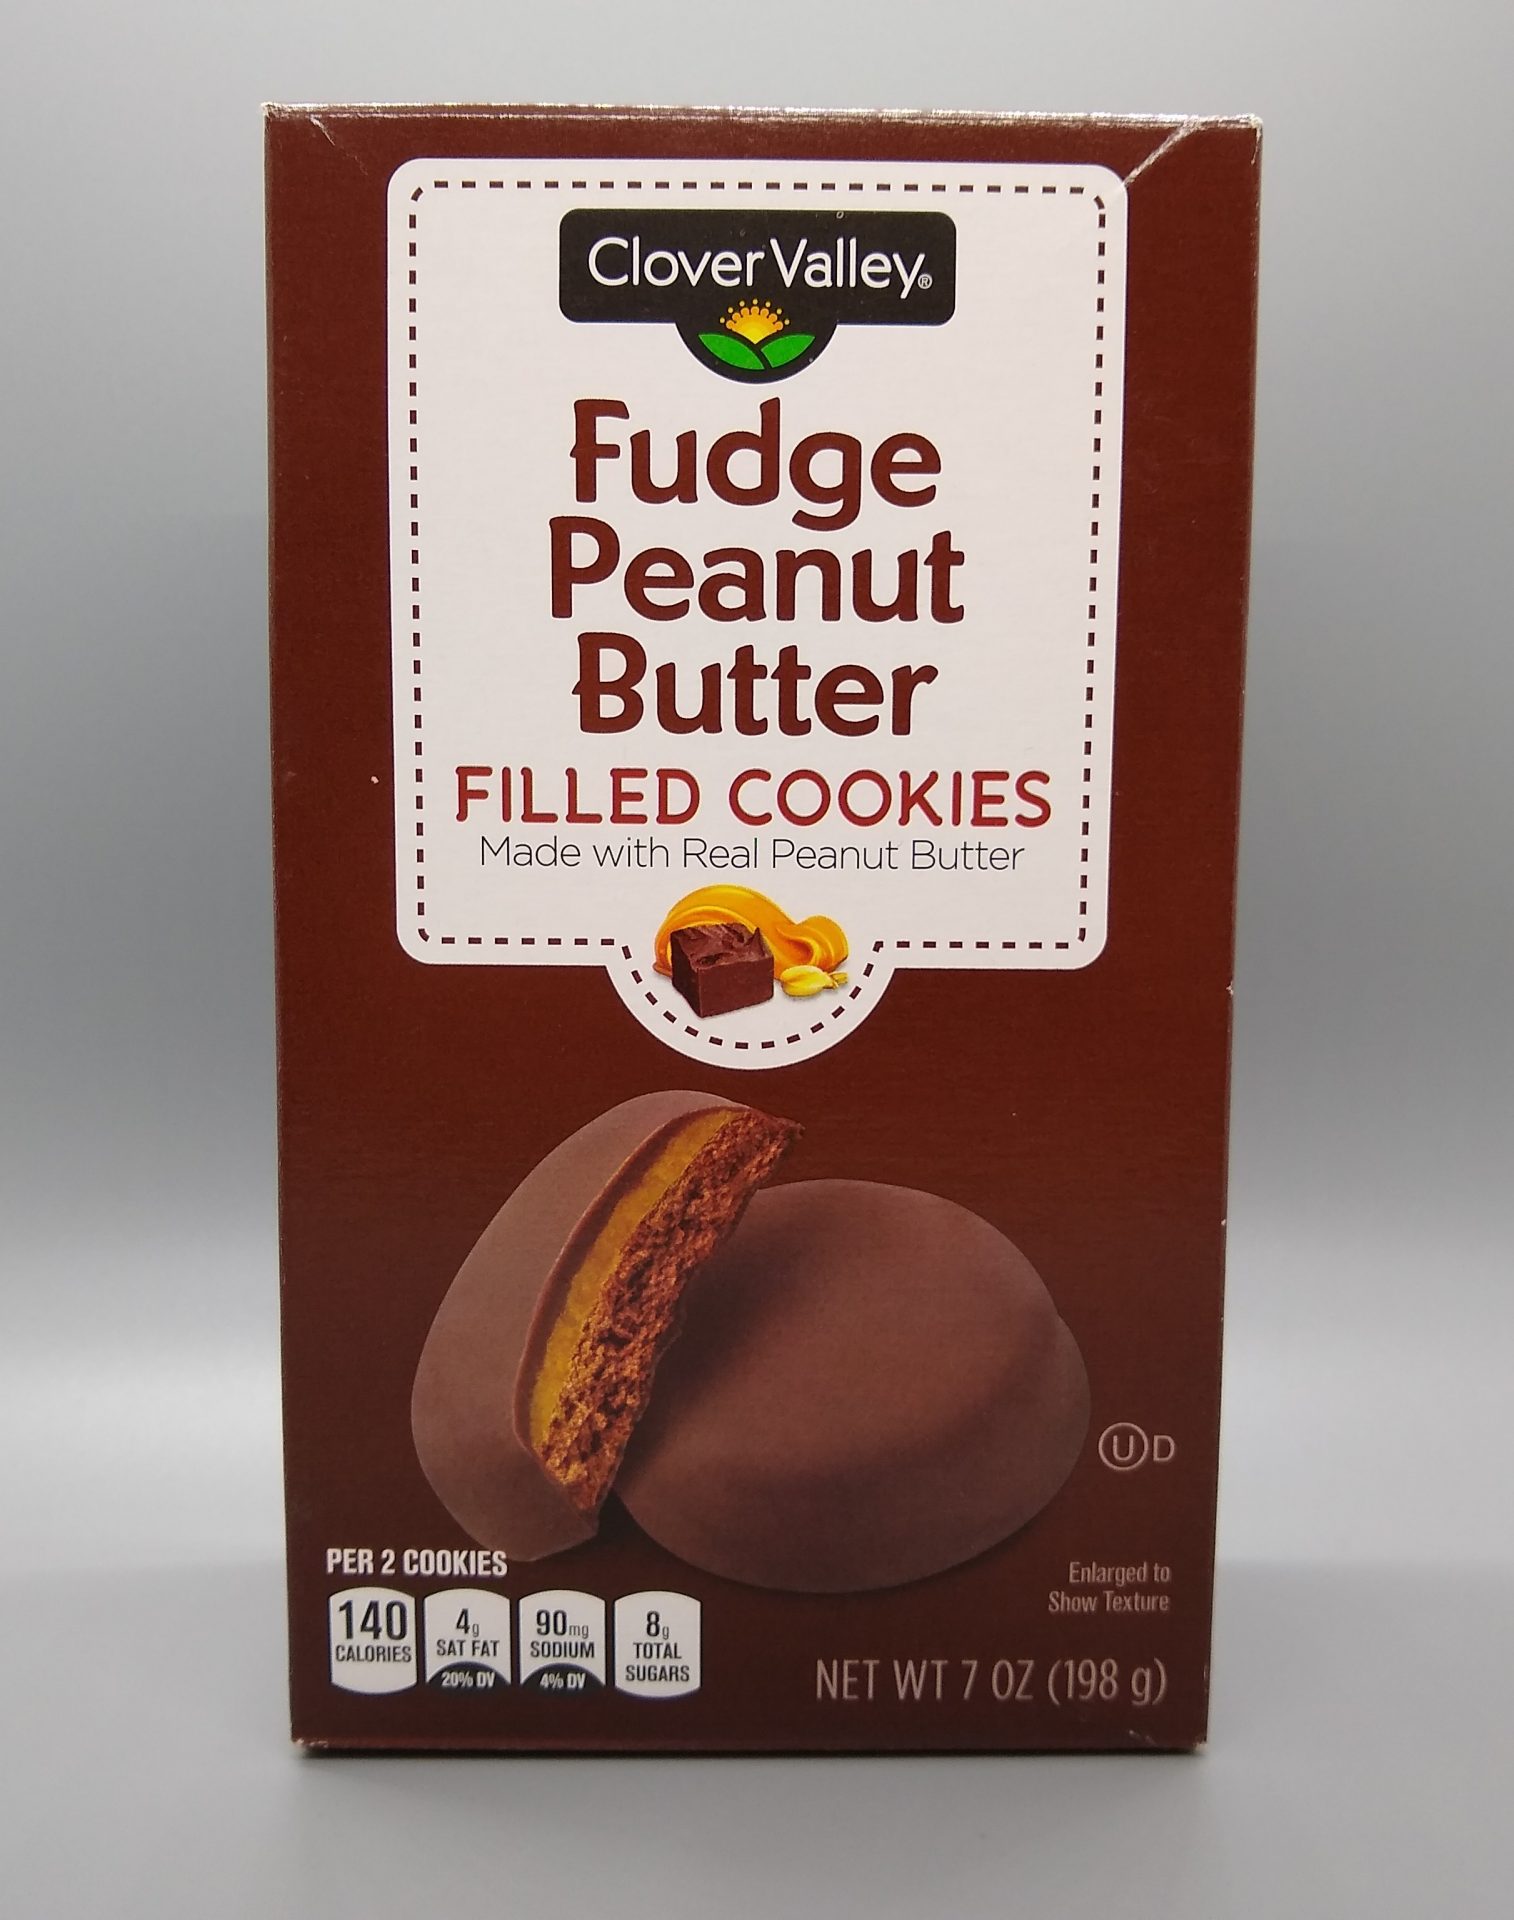 Clover Valley Fudge Peanut Butter Filled Cookies